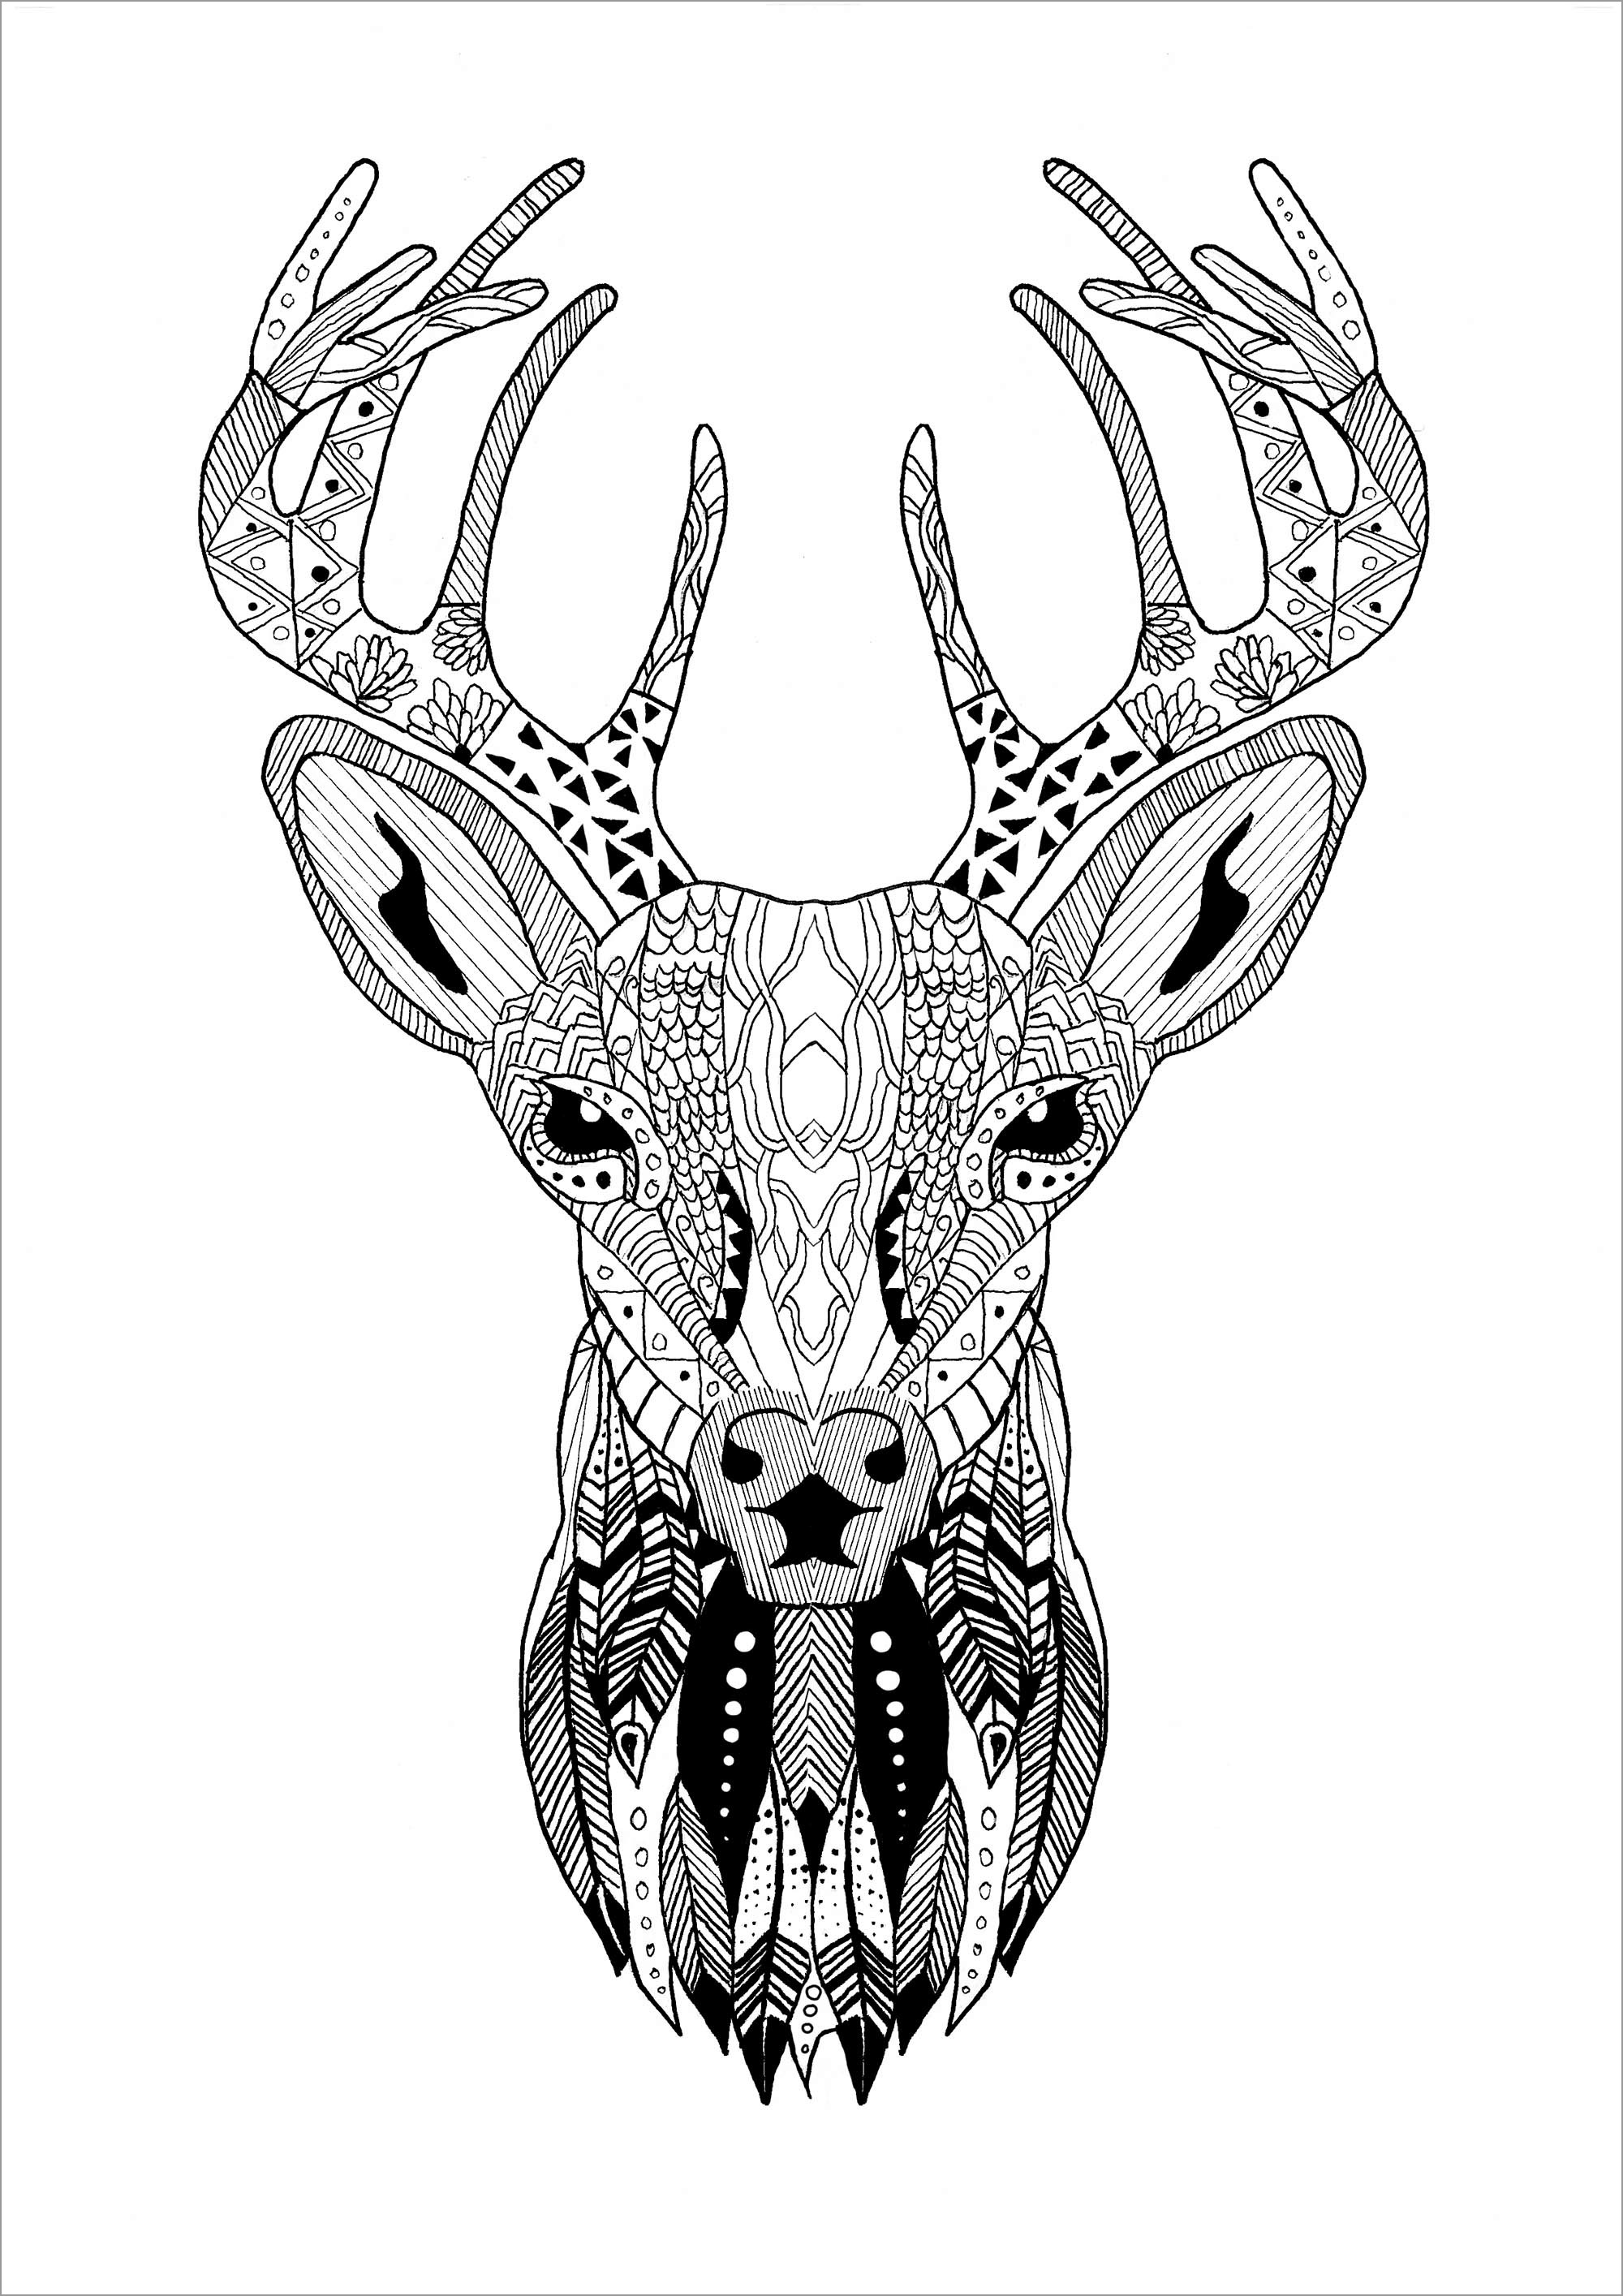 Zentangle Reindeer Christmas Head Coloring Page for Adult